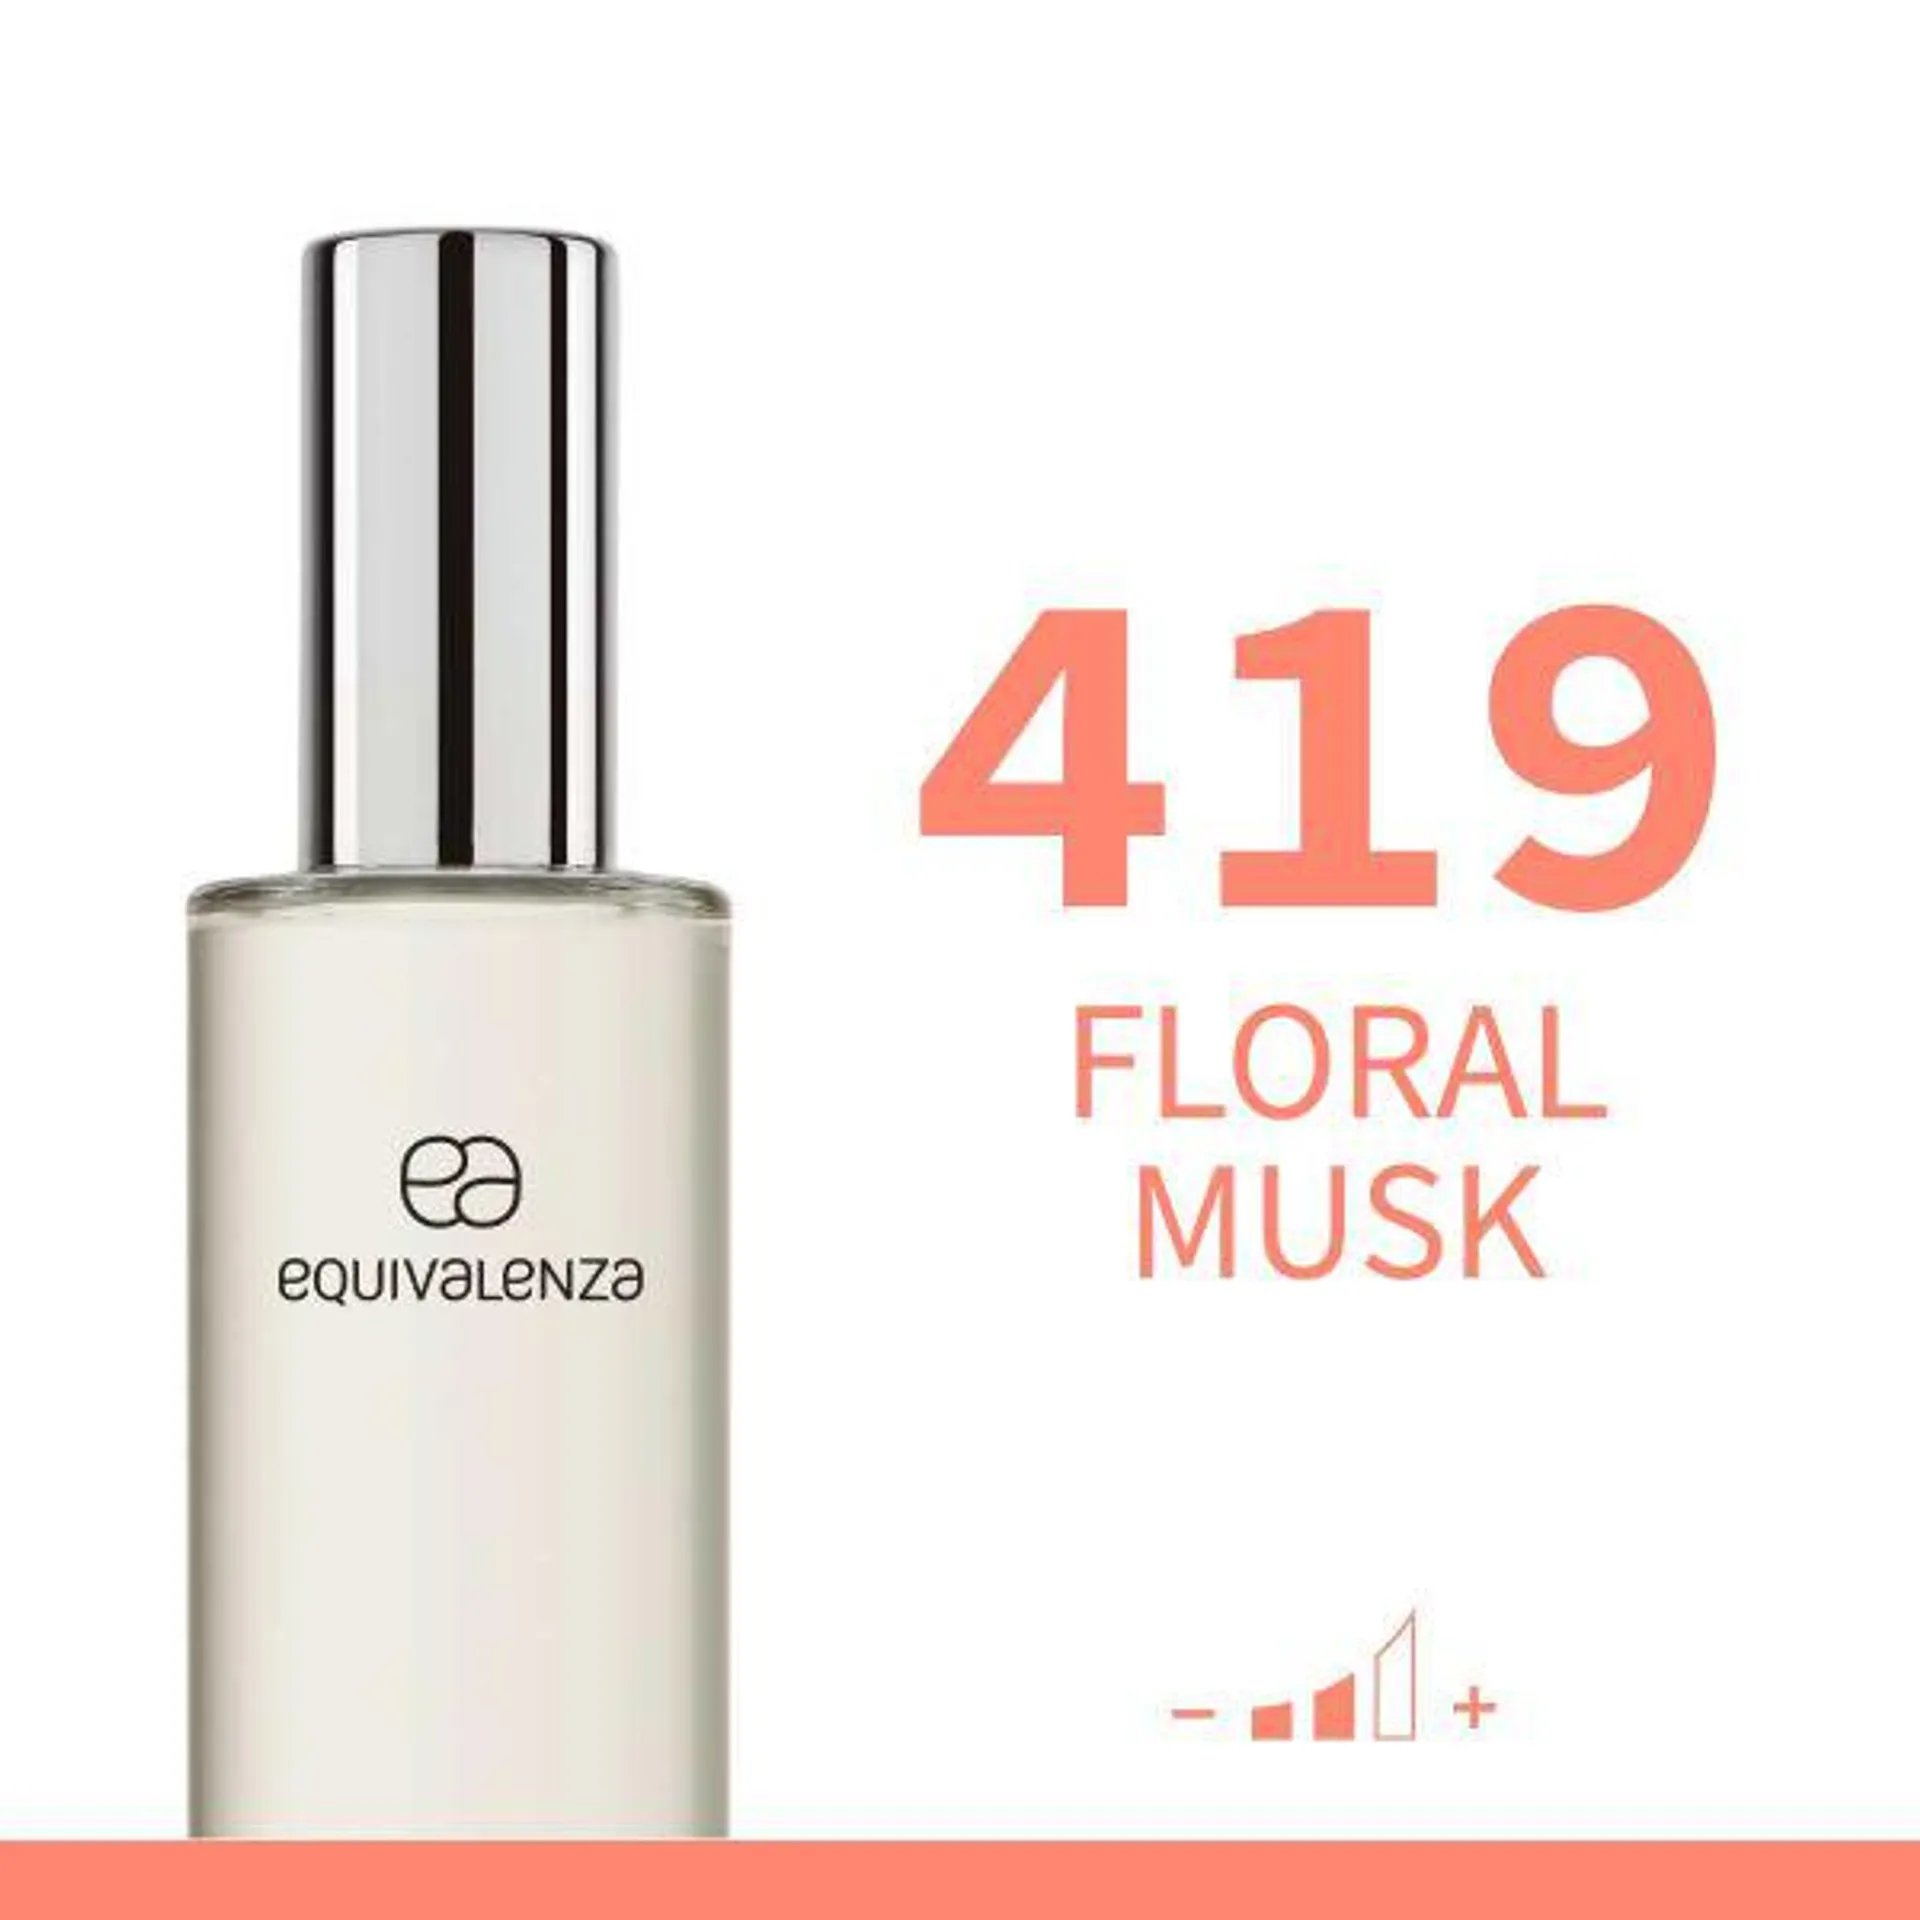 Floral Musk 419